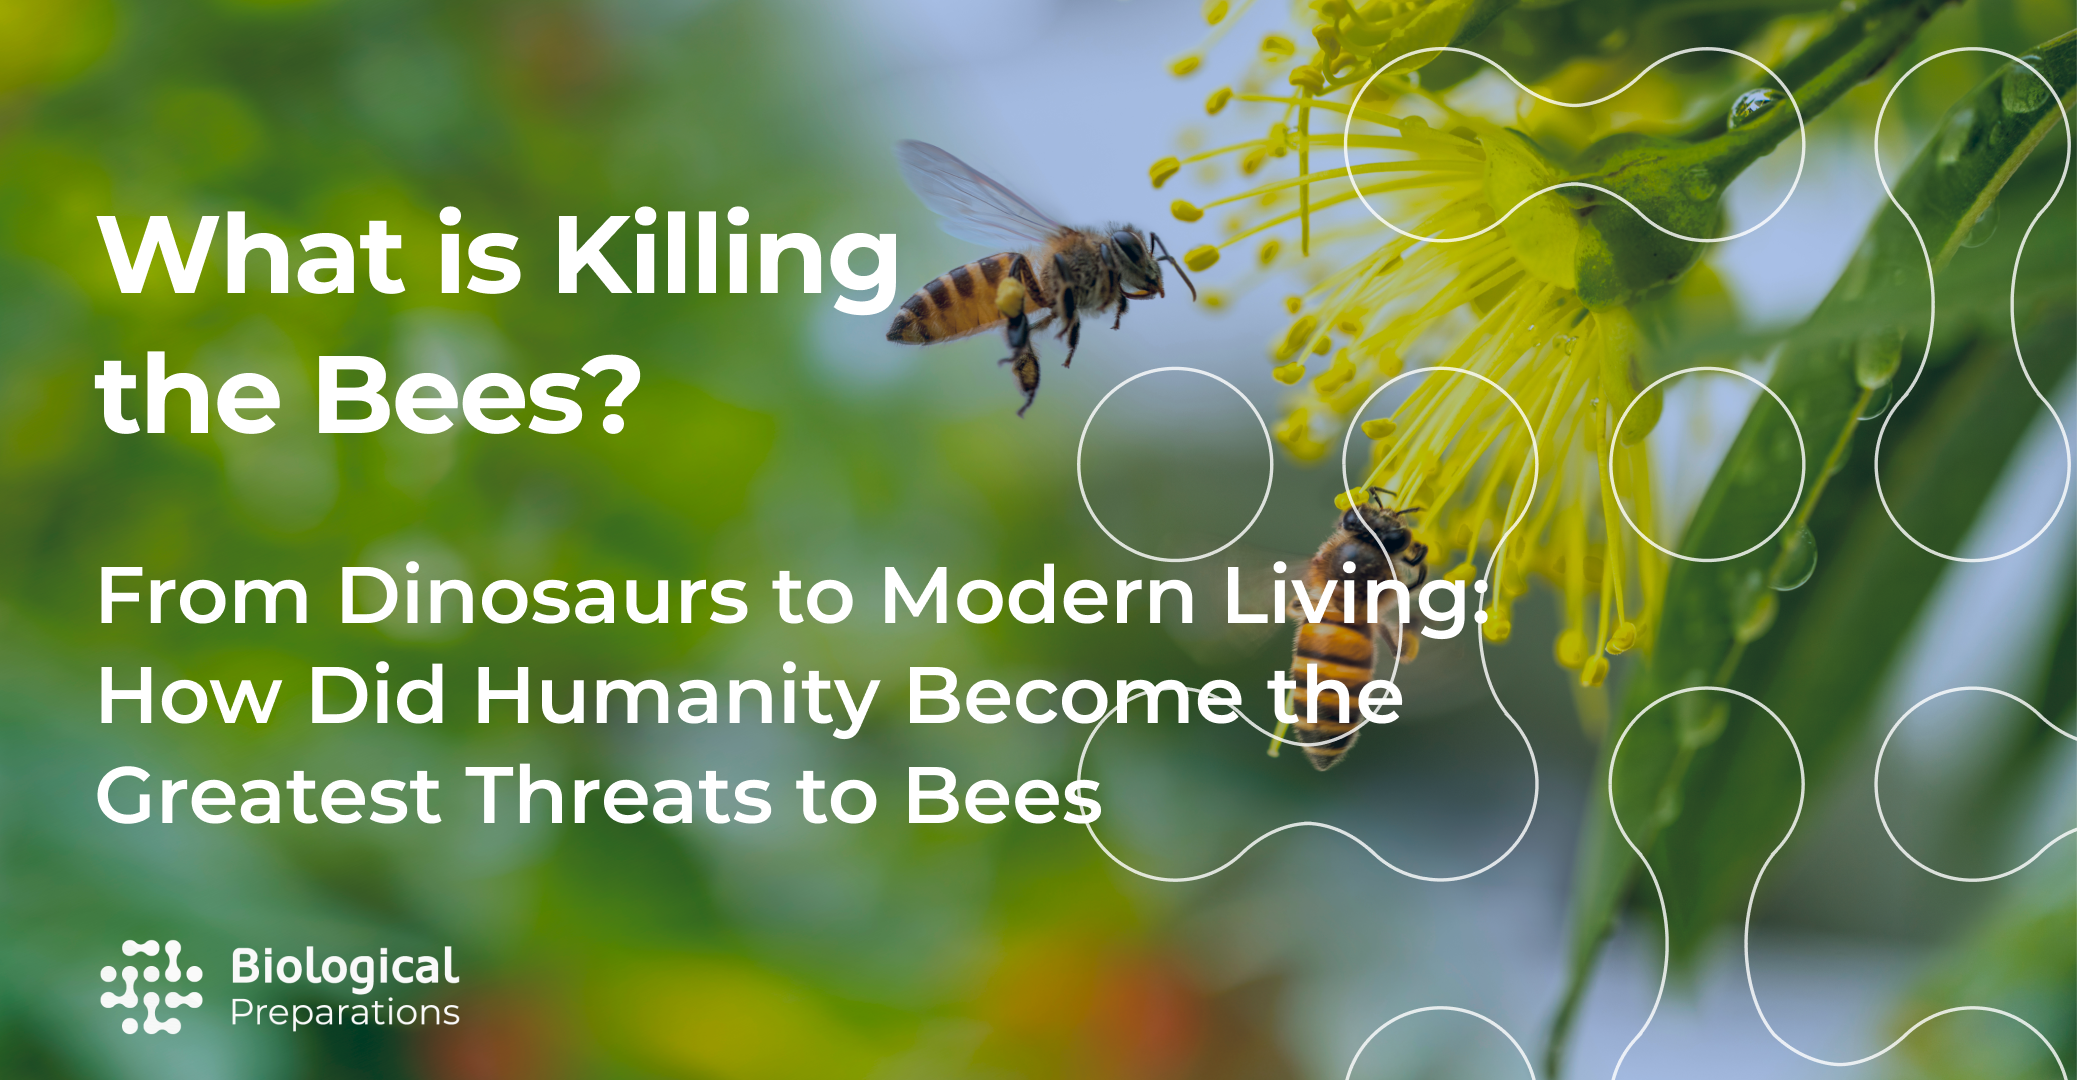 What is Killing the Bees? Their History and Our Future